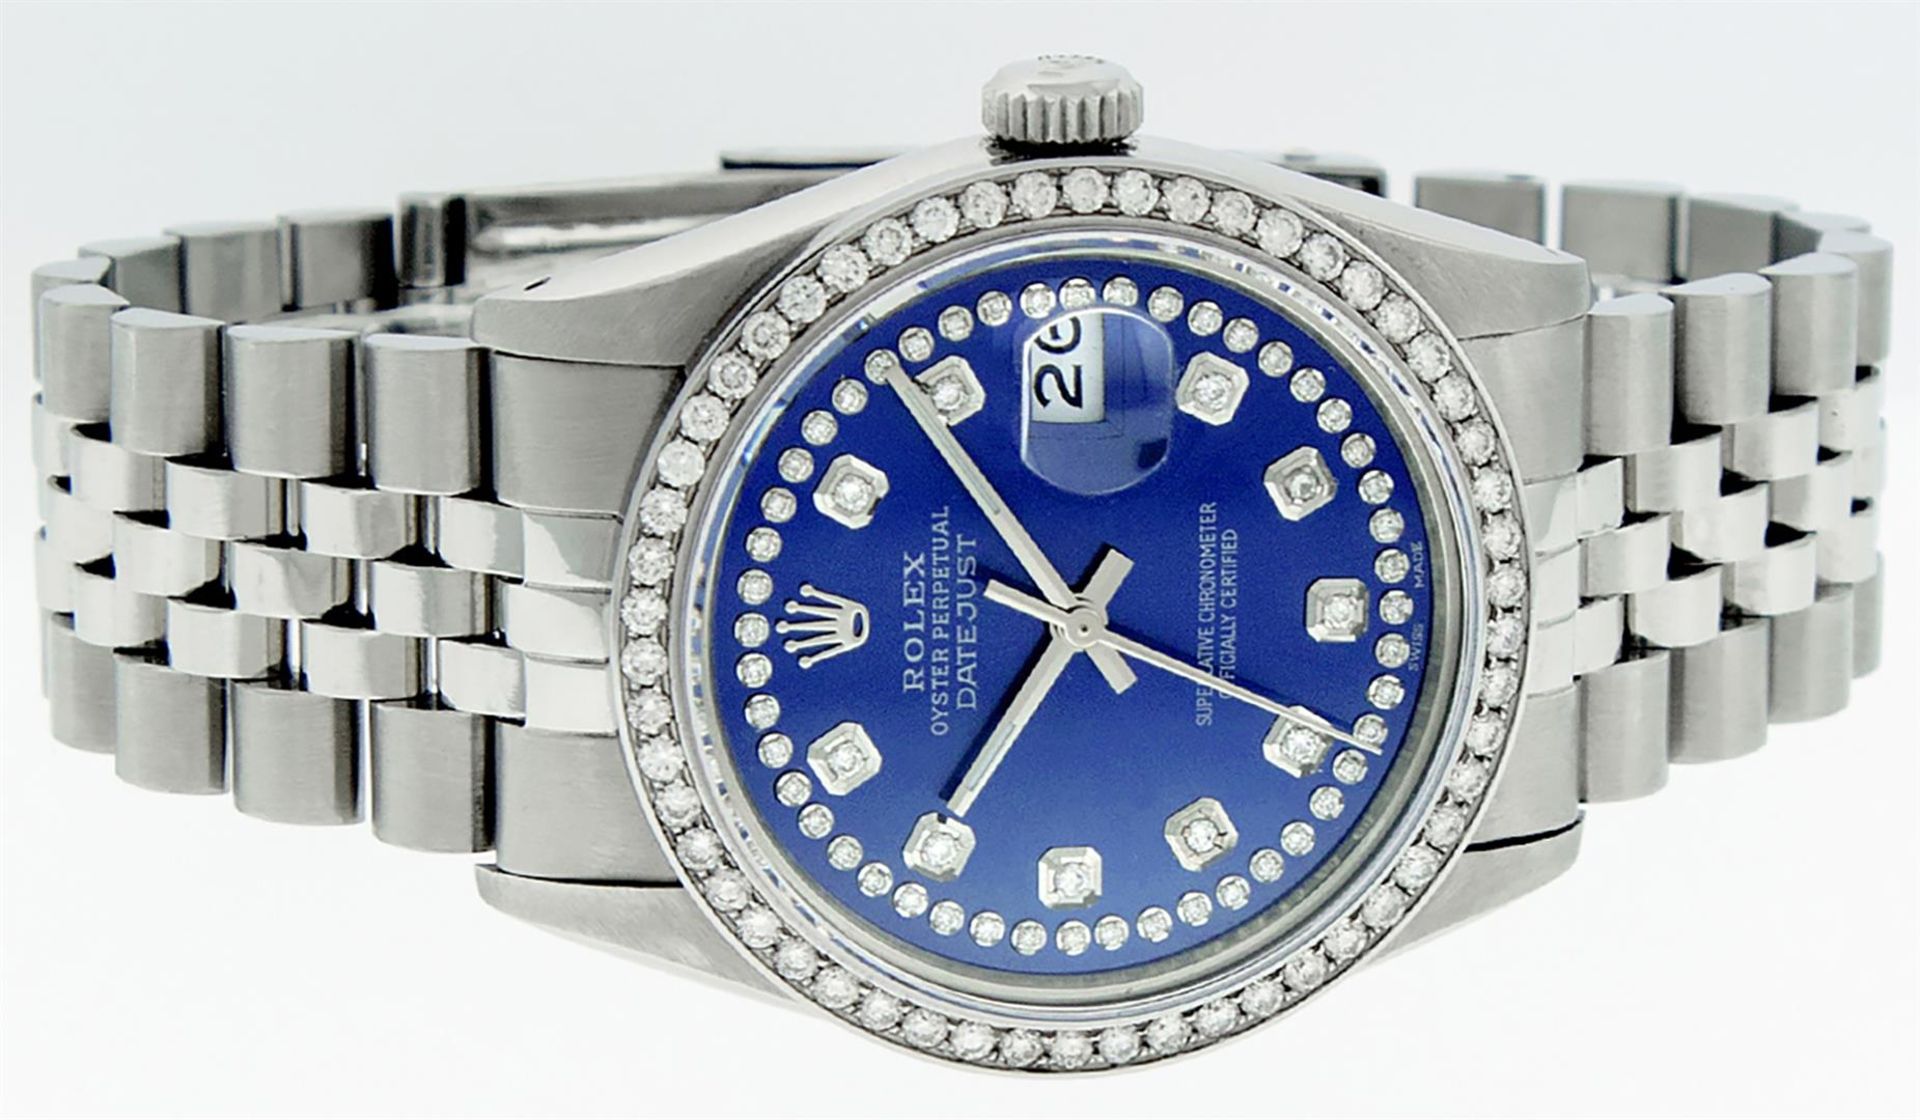 Rolex Stainless Steel Blue String Diamond 36MM Oyster Perpetual Datejust Wristwa - Image 3 of 9